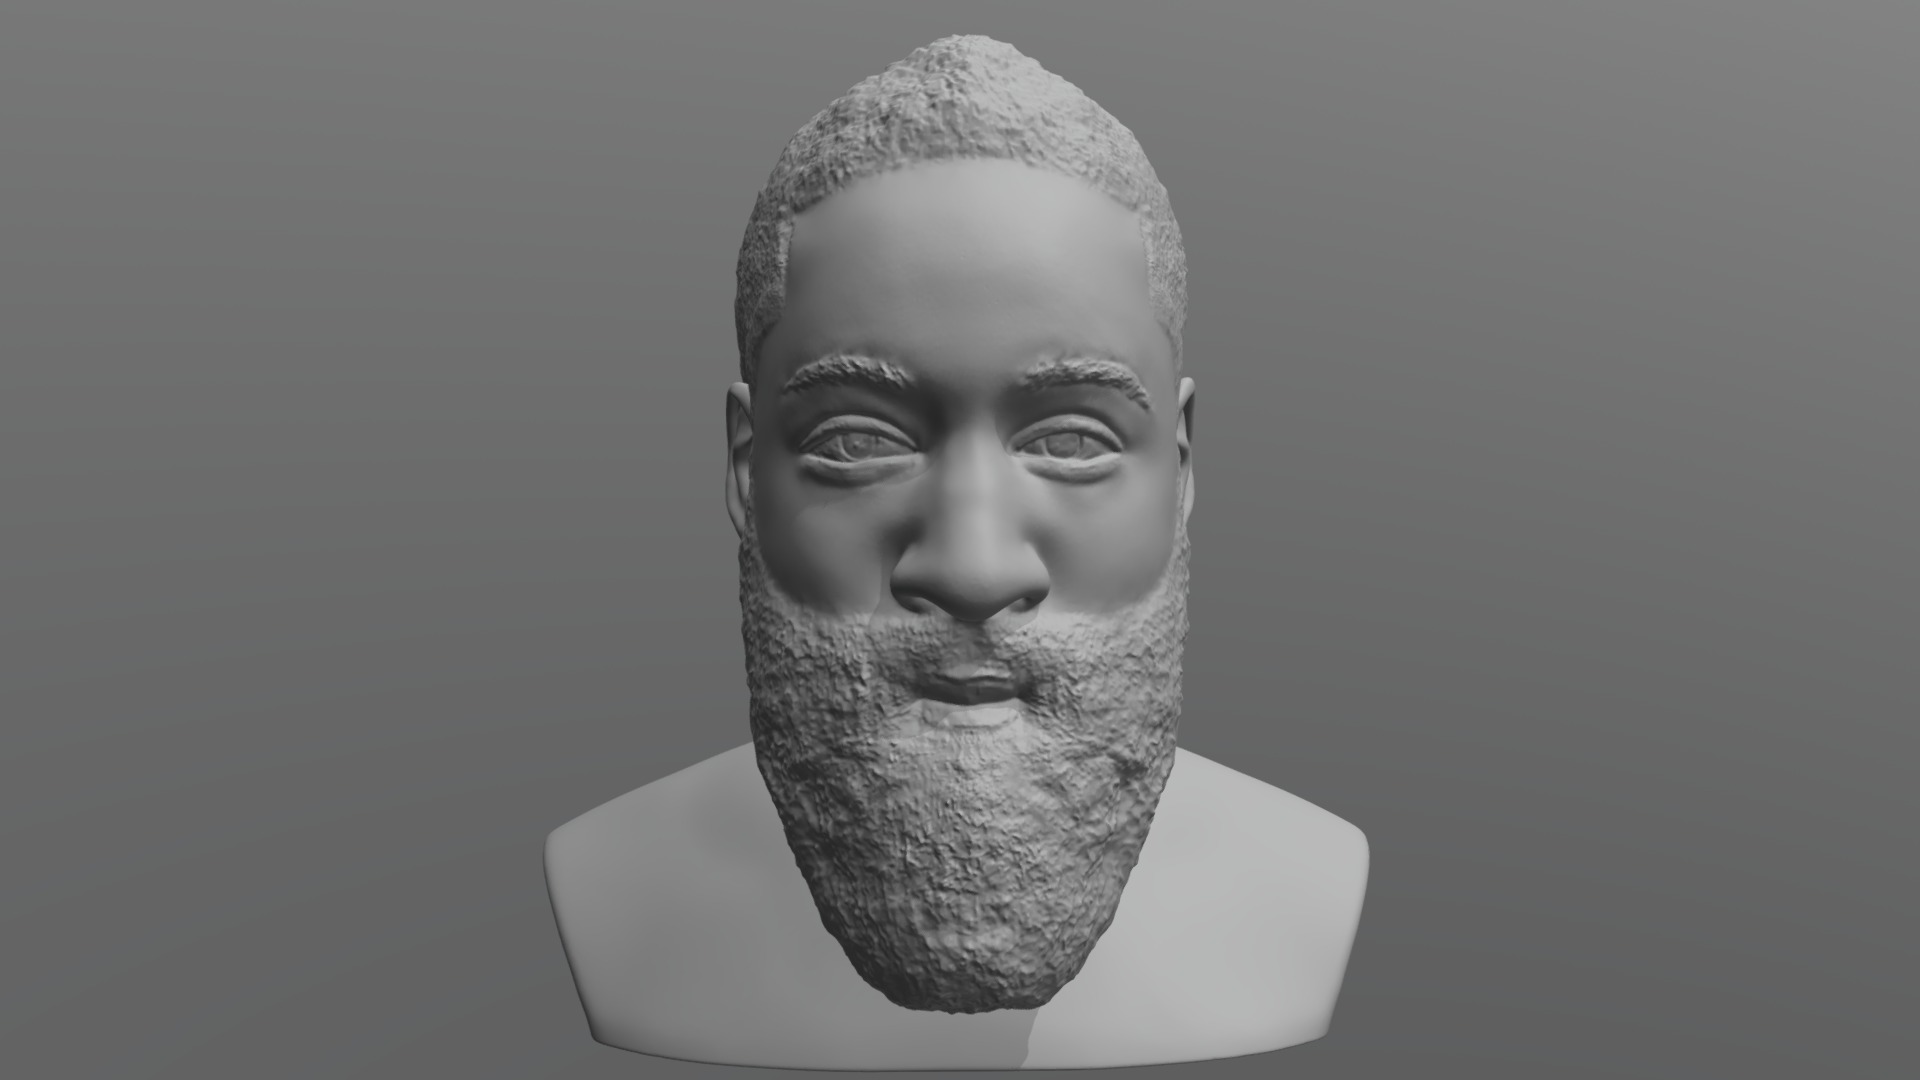 3D model James Harden bust for 3D printing - This is a 3D model of the James Harden bust for 3D printing. The 3D model is about a man with a beard.